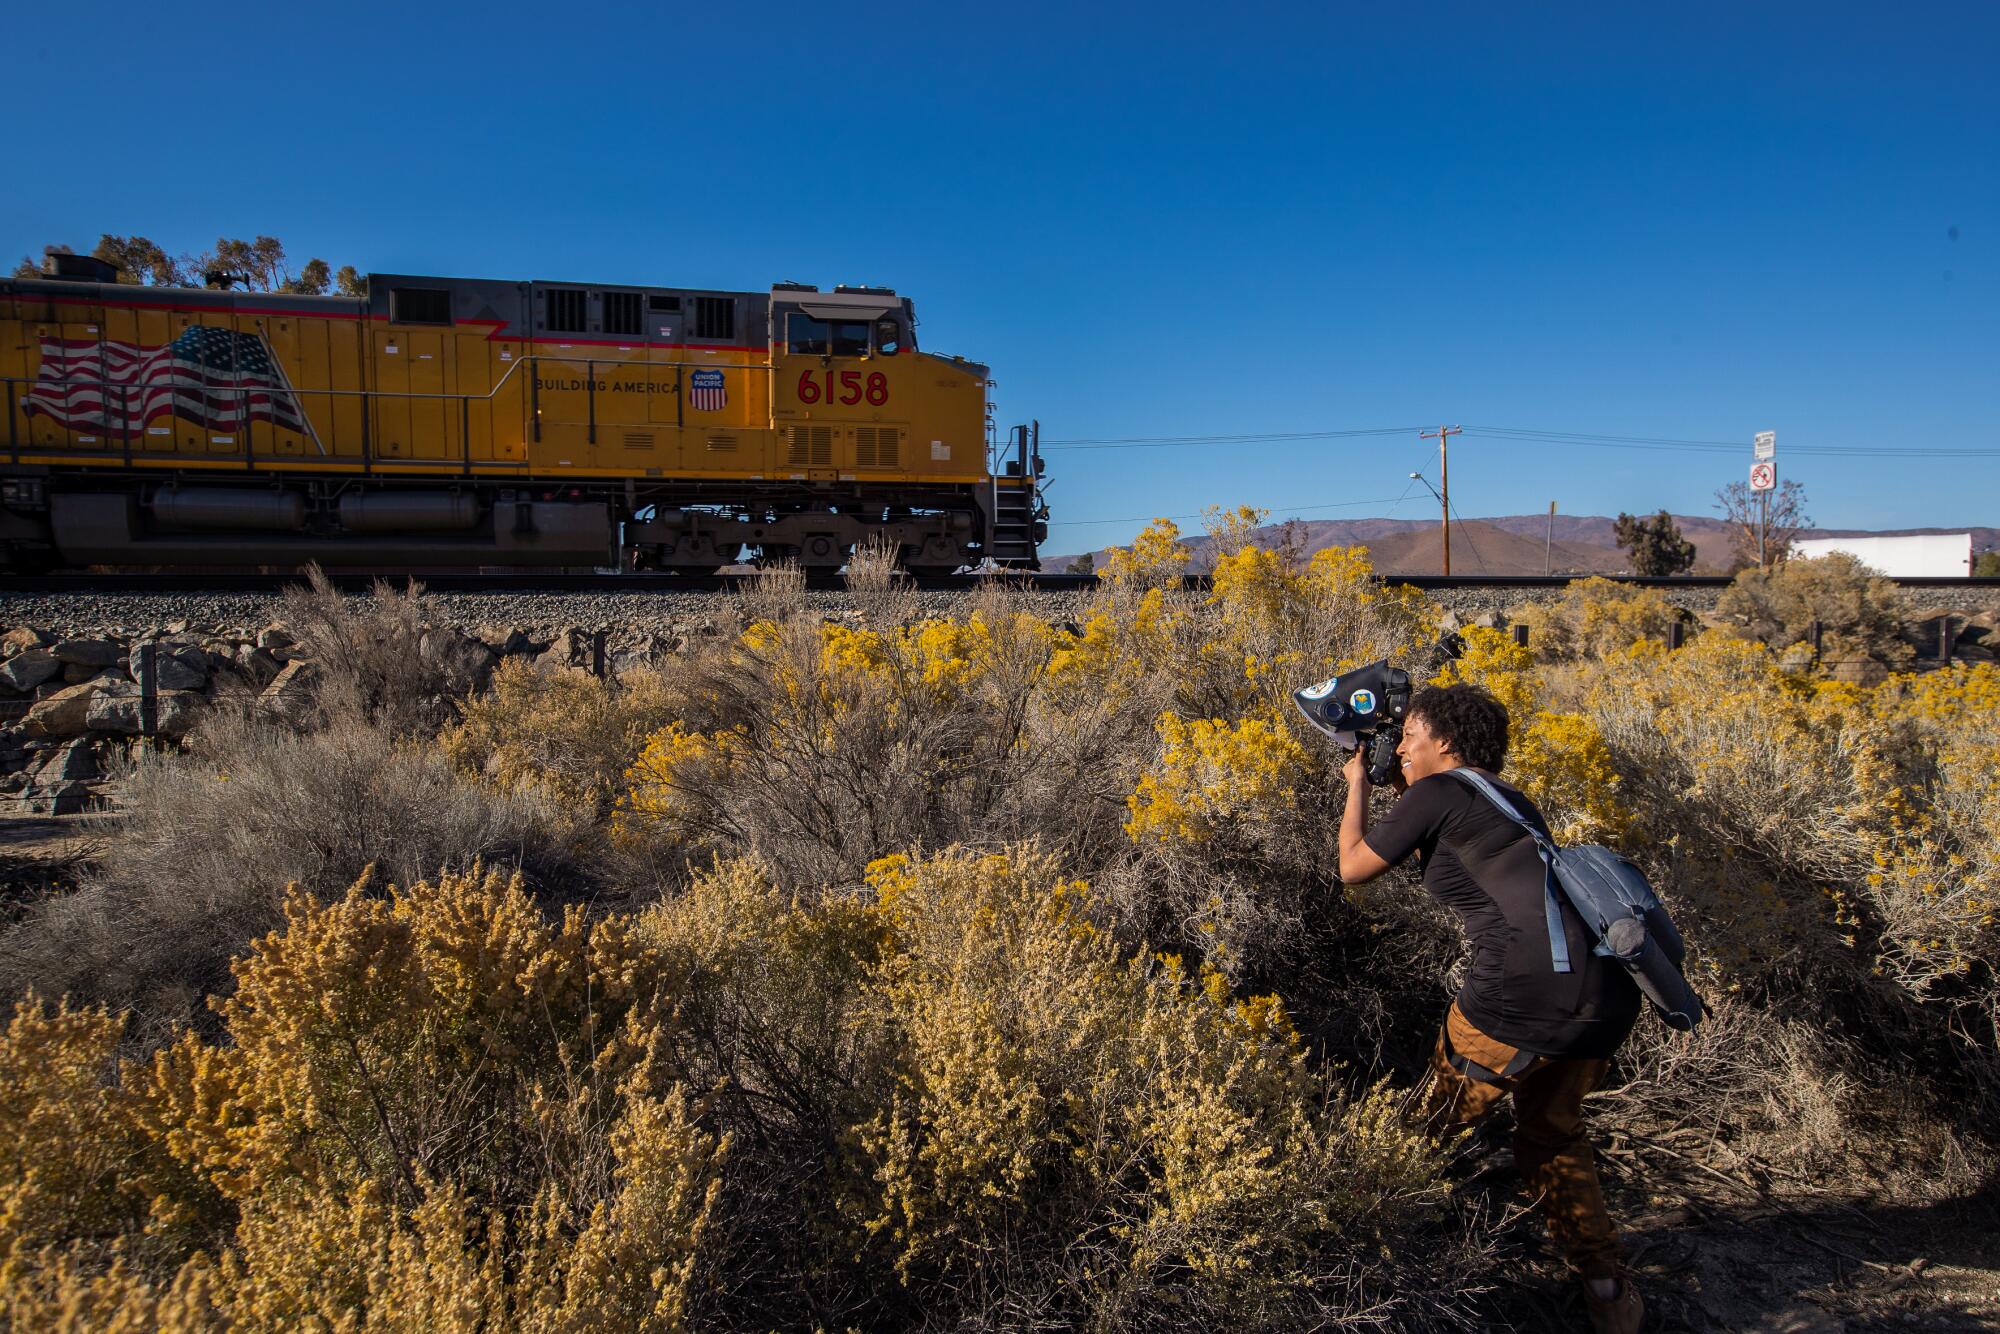 Krystle Hickman crouching to take pictures, with a train in the background of the desert scene.